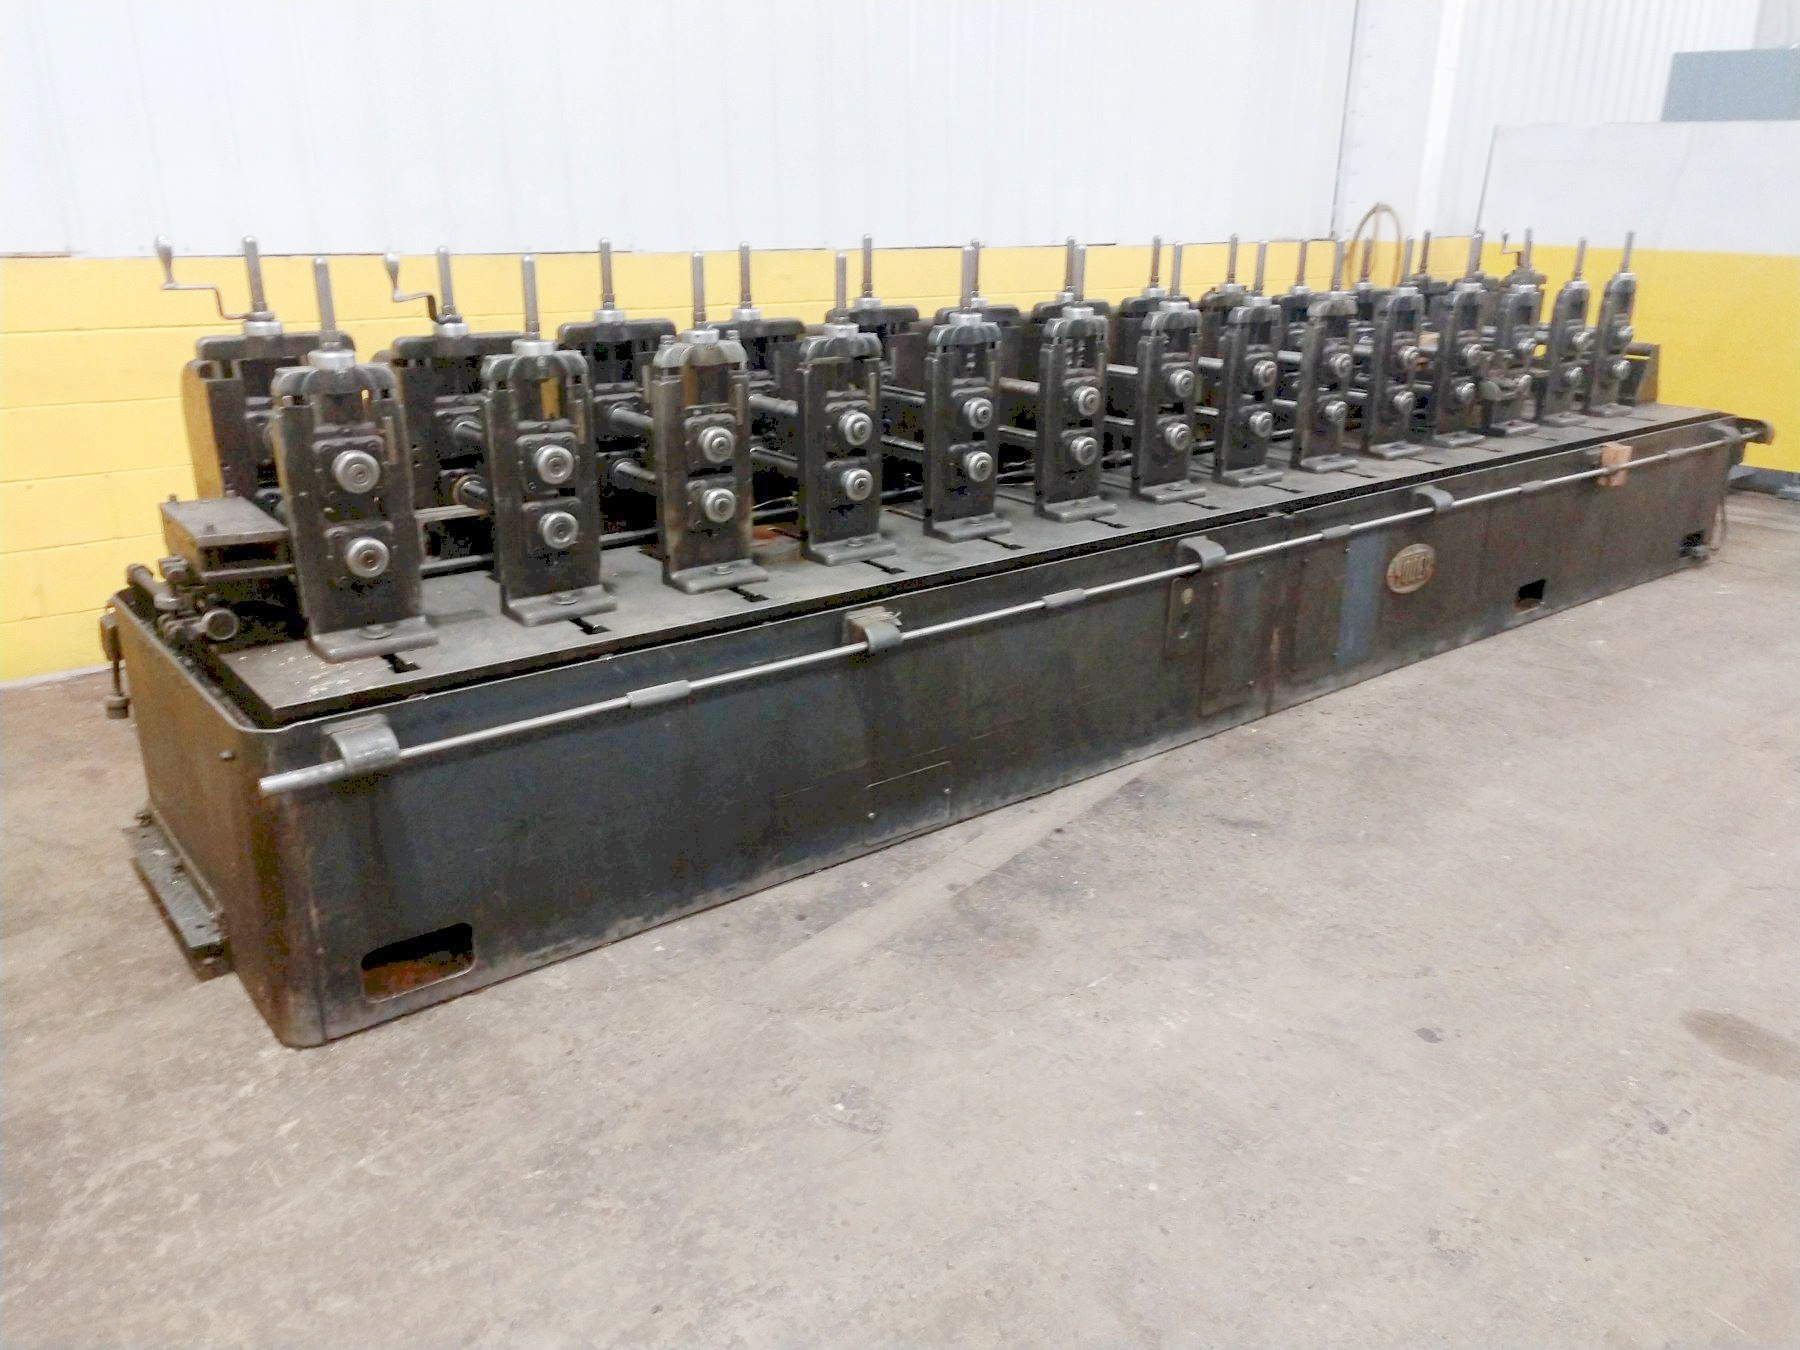 14 Stand X 2″ Yoder M2 Rollformer Machine (used) Item # UE-081921D (Ohio)